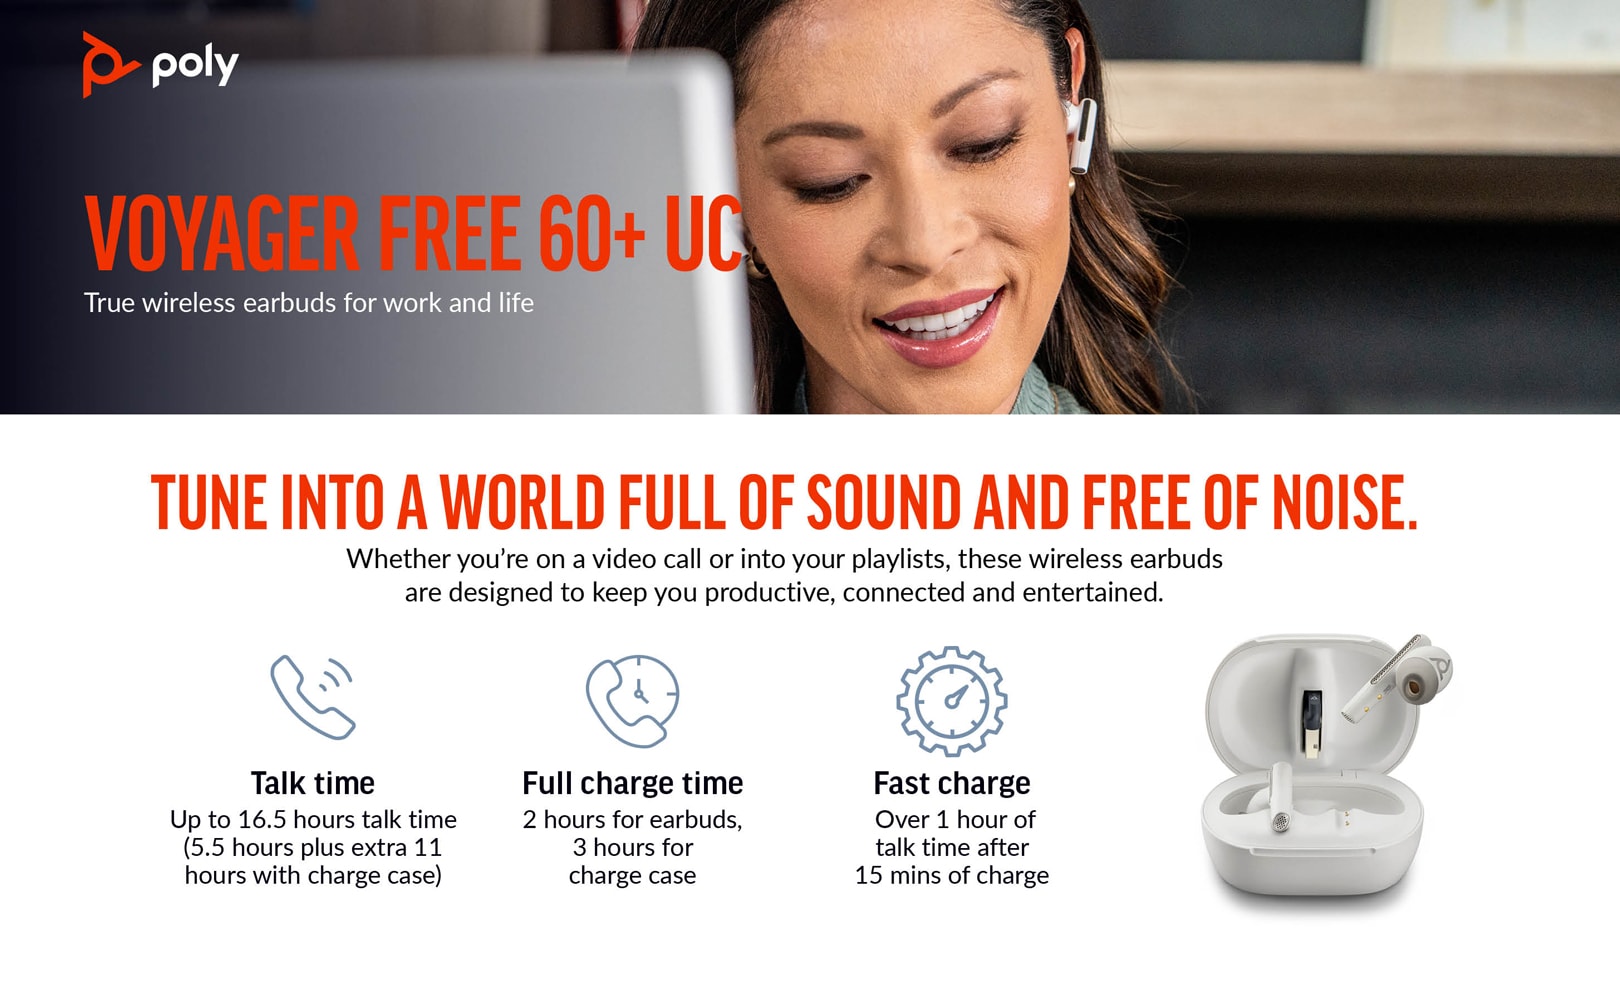 Poly Voyager Free 60+ UC White Sand Earbuds, BT700 USB A adapter,  Touchscreen Charge Case